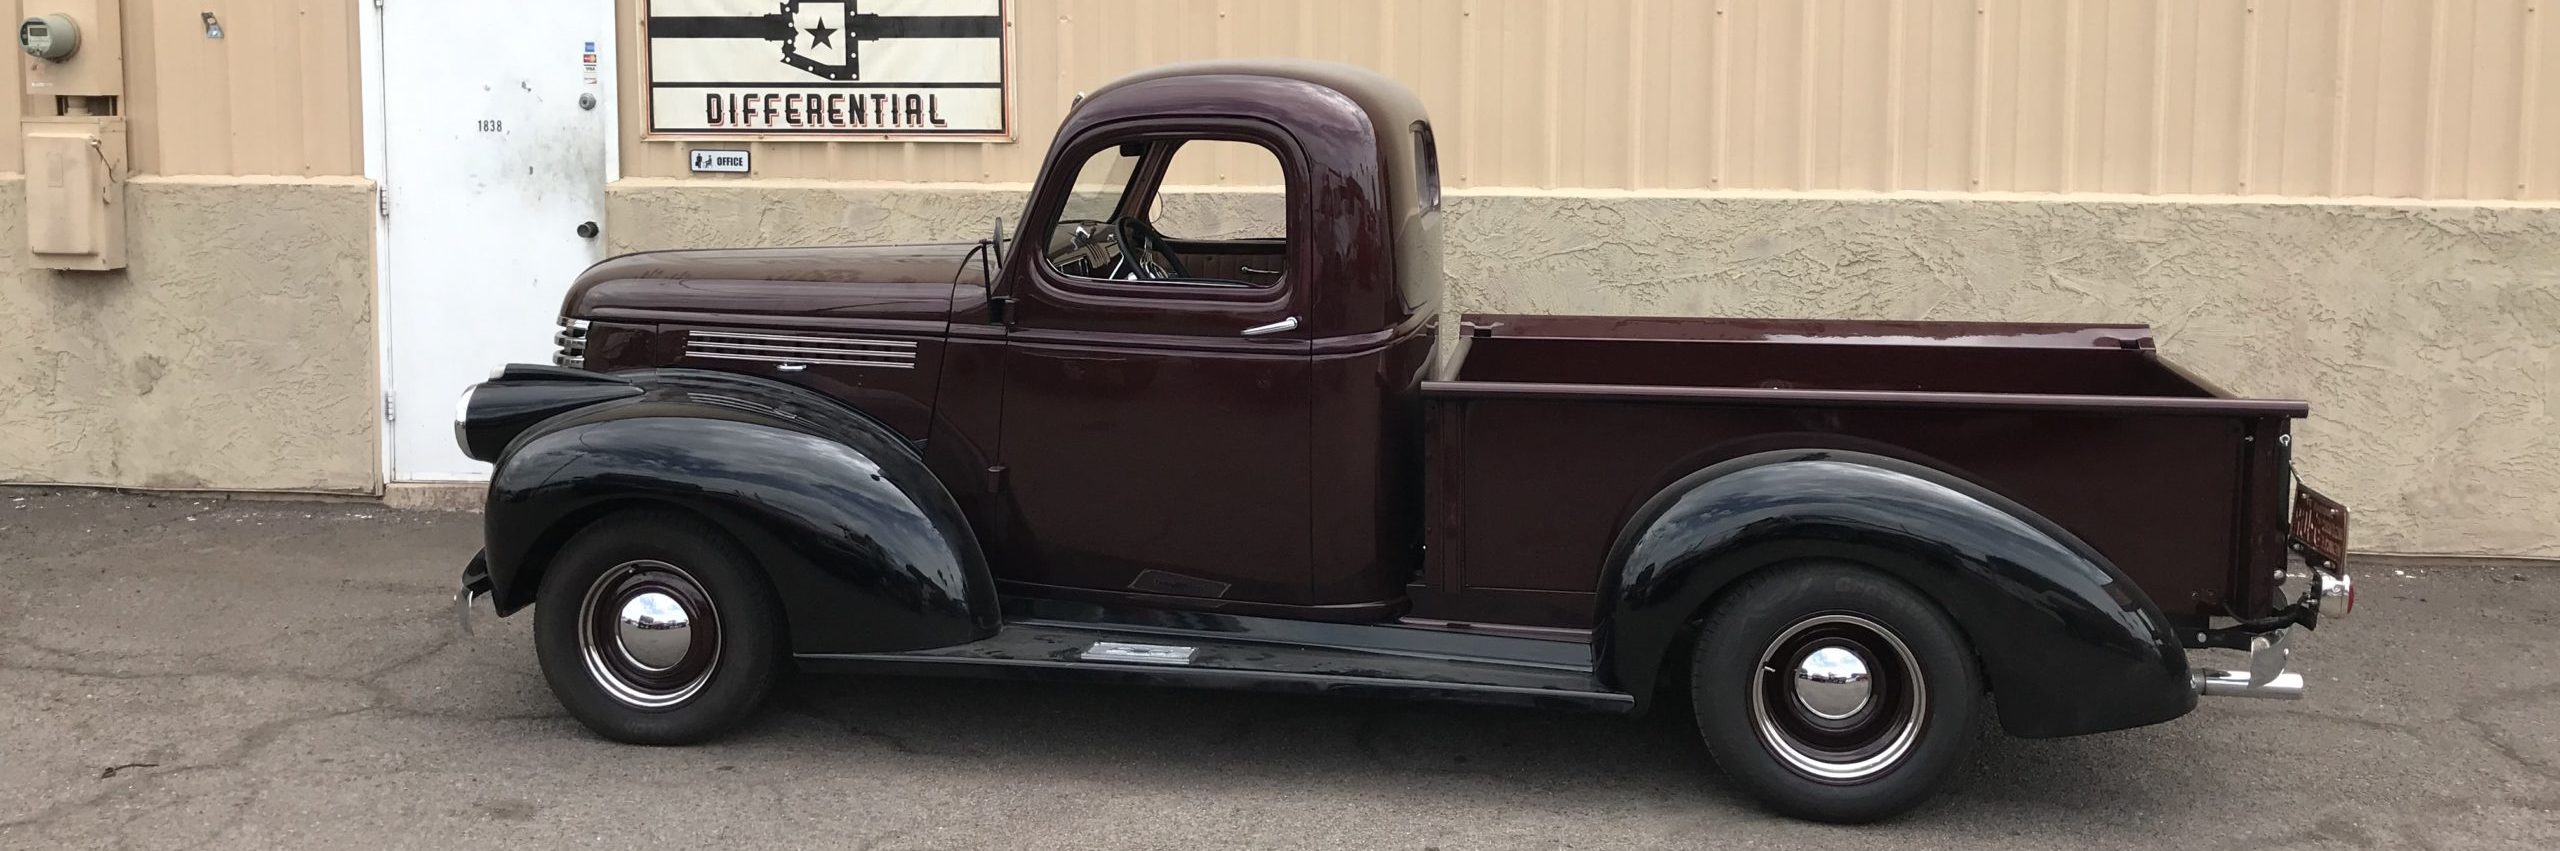 Classic Brown pick-up truck